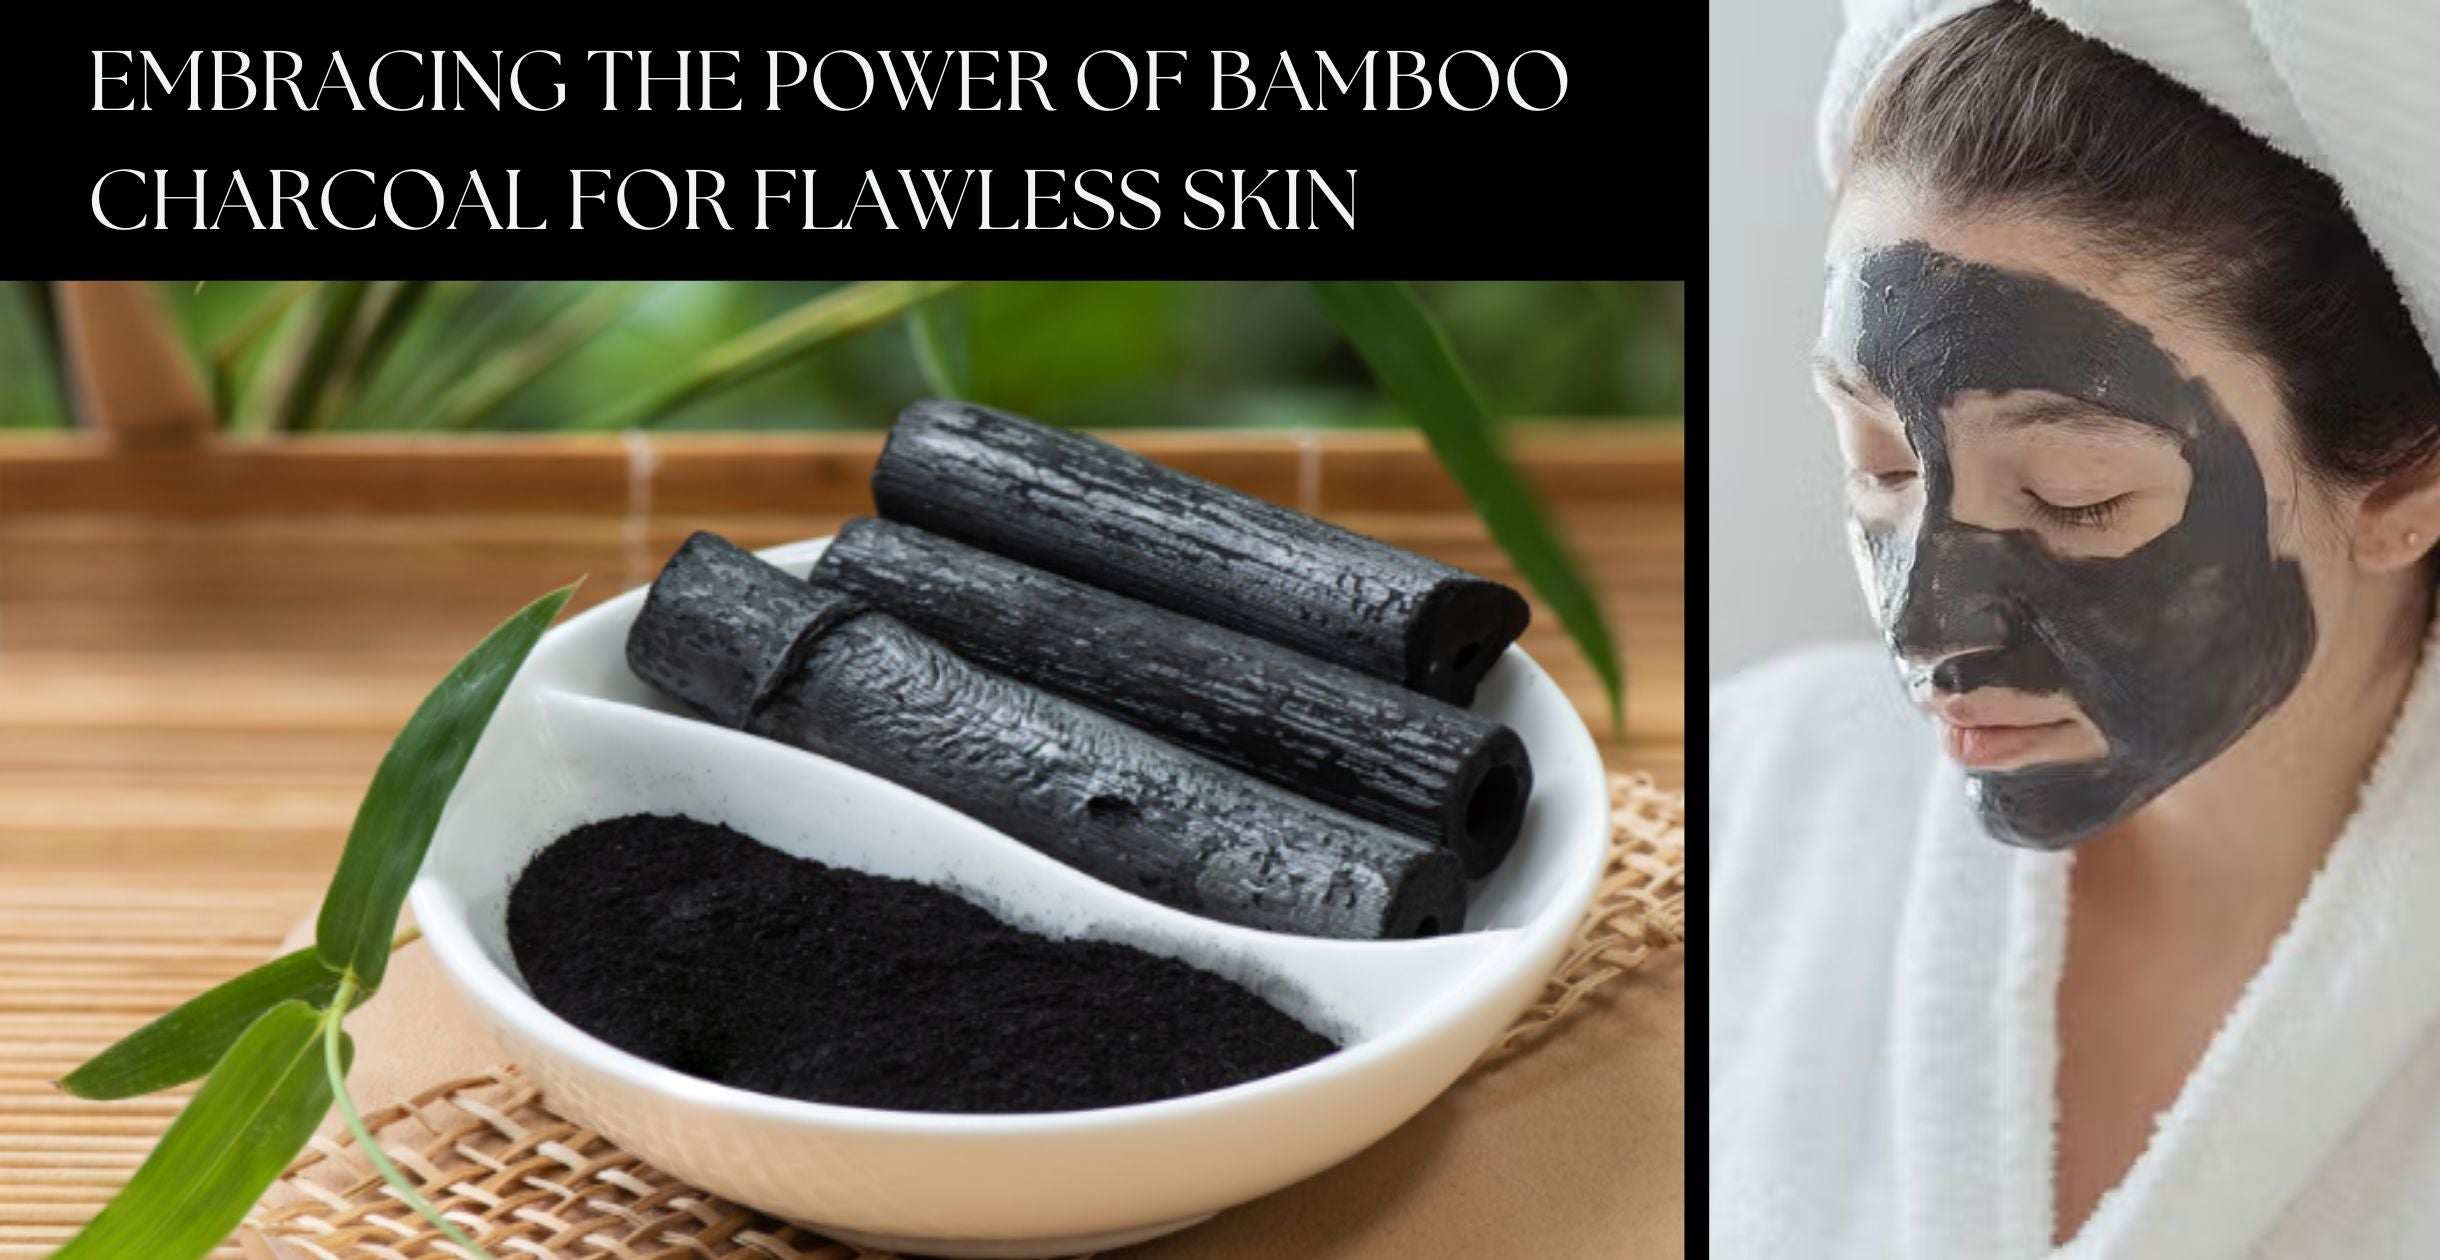 Embracing the Power of Bamboo Charcoal for Flawless Skin